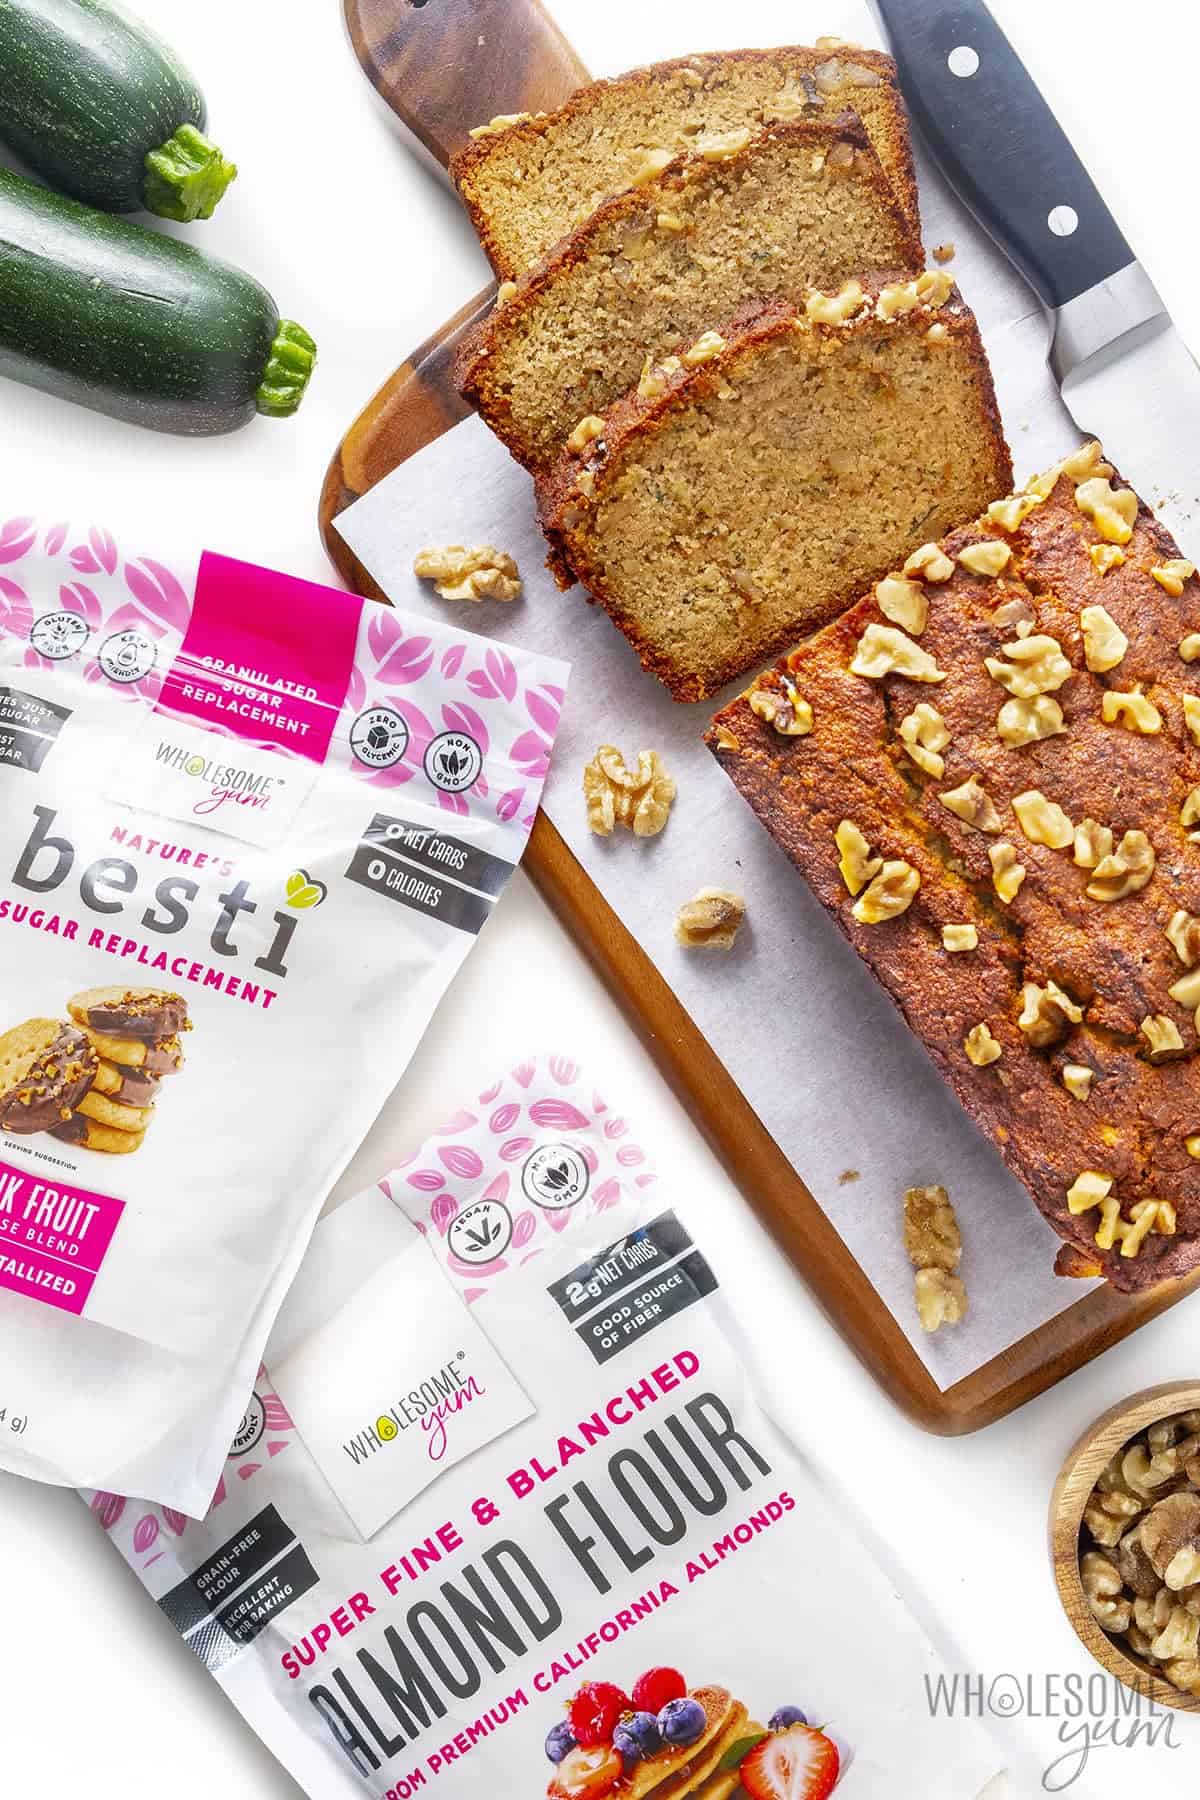 Healthy zucchini bread recipe next to bag of Besti and Wholesome Yum Almond Flour.